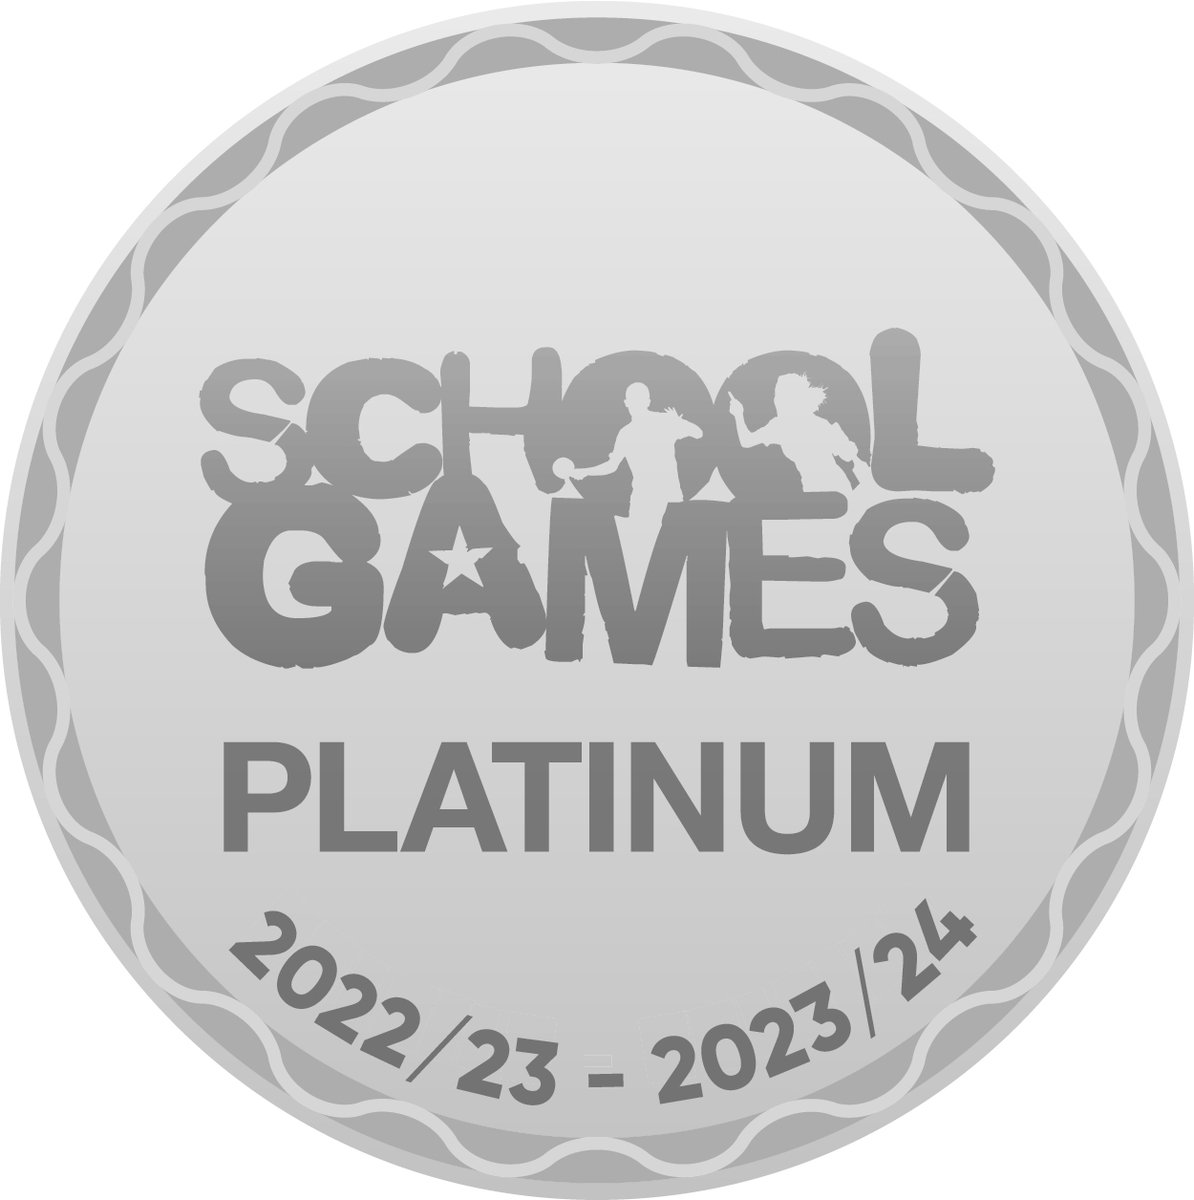 SCHOOL GAMES MARK🏅

Congratulations to @RykneldS on achieving the PLATINUM @YourSchoolGames Mark.  

Your hard work and enthusiasm to provide opportunities within your school is fantastic, we are very proud of your achievement 👏

#SchoolGames #WeLovePE @StaffsSG @JohnTaylorMAT